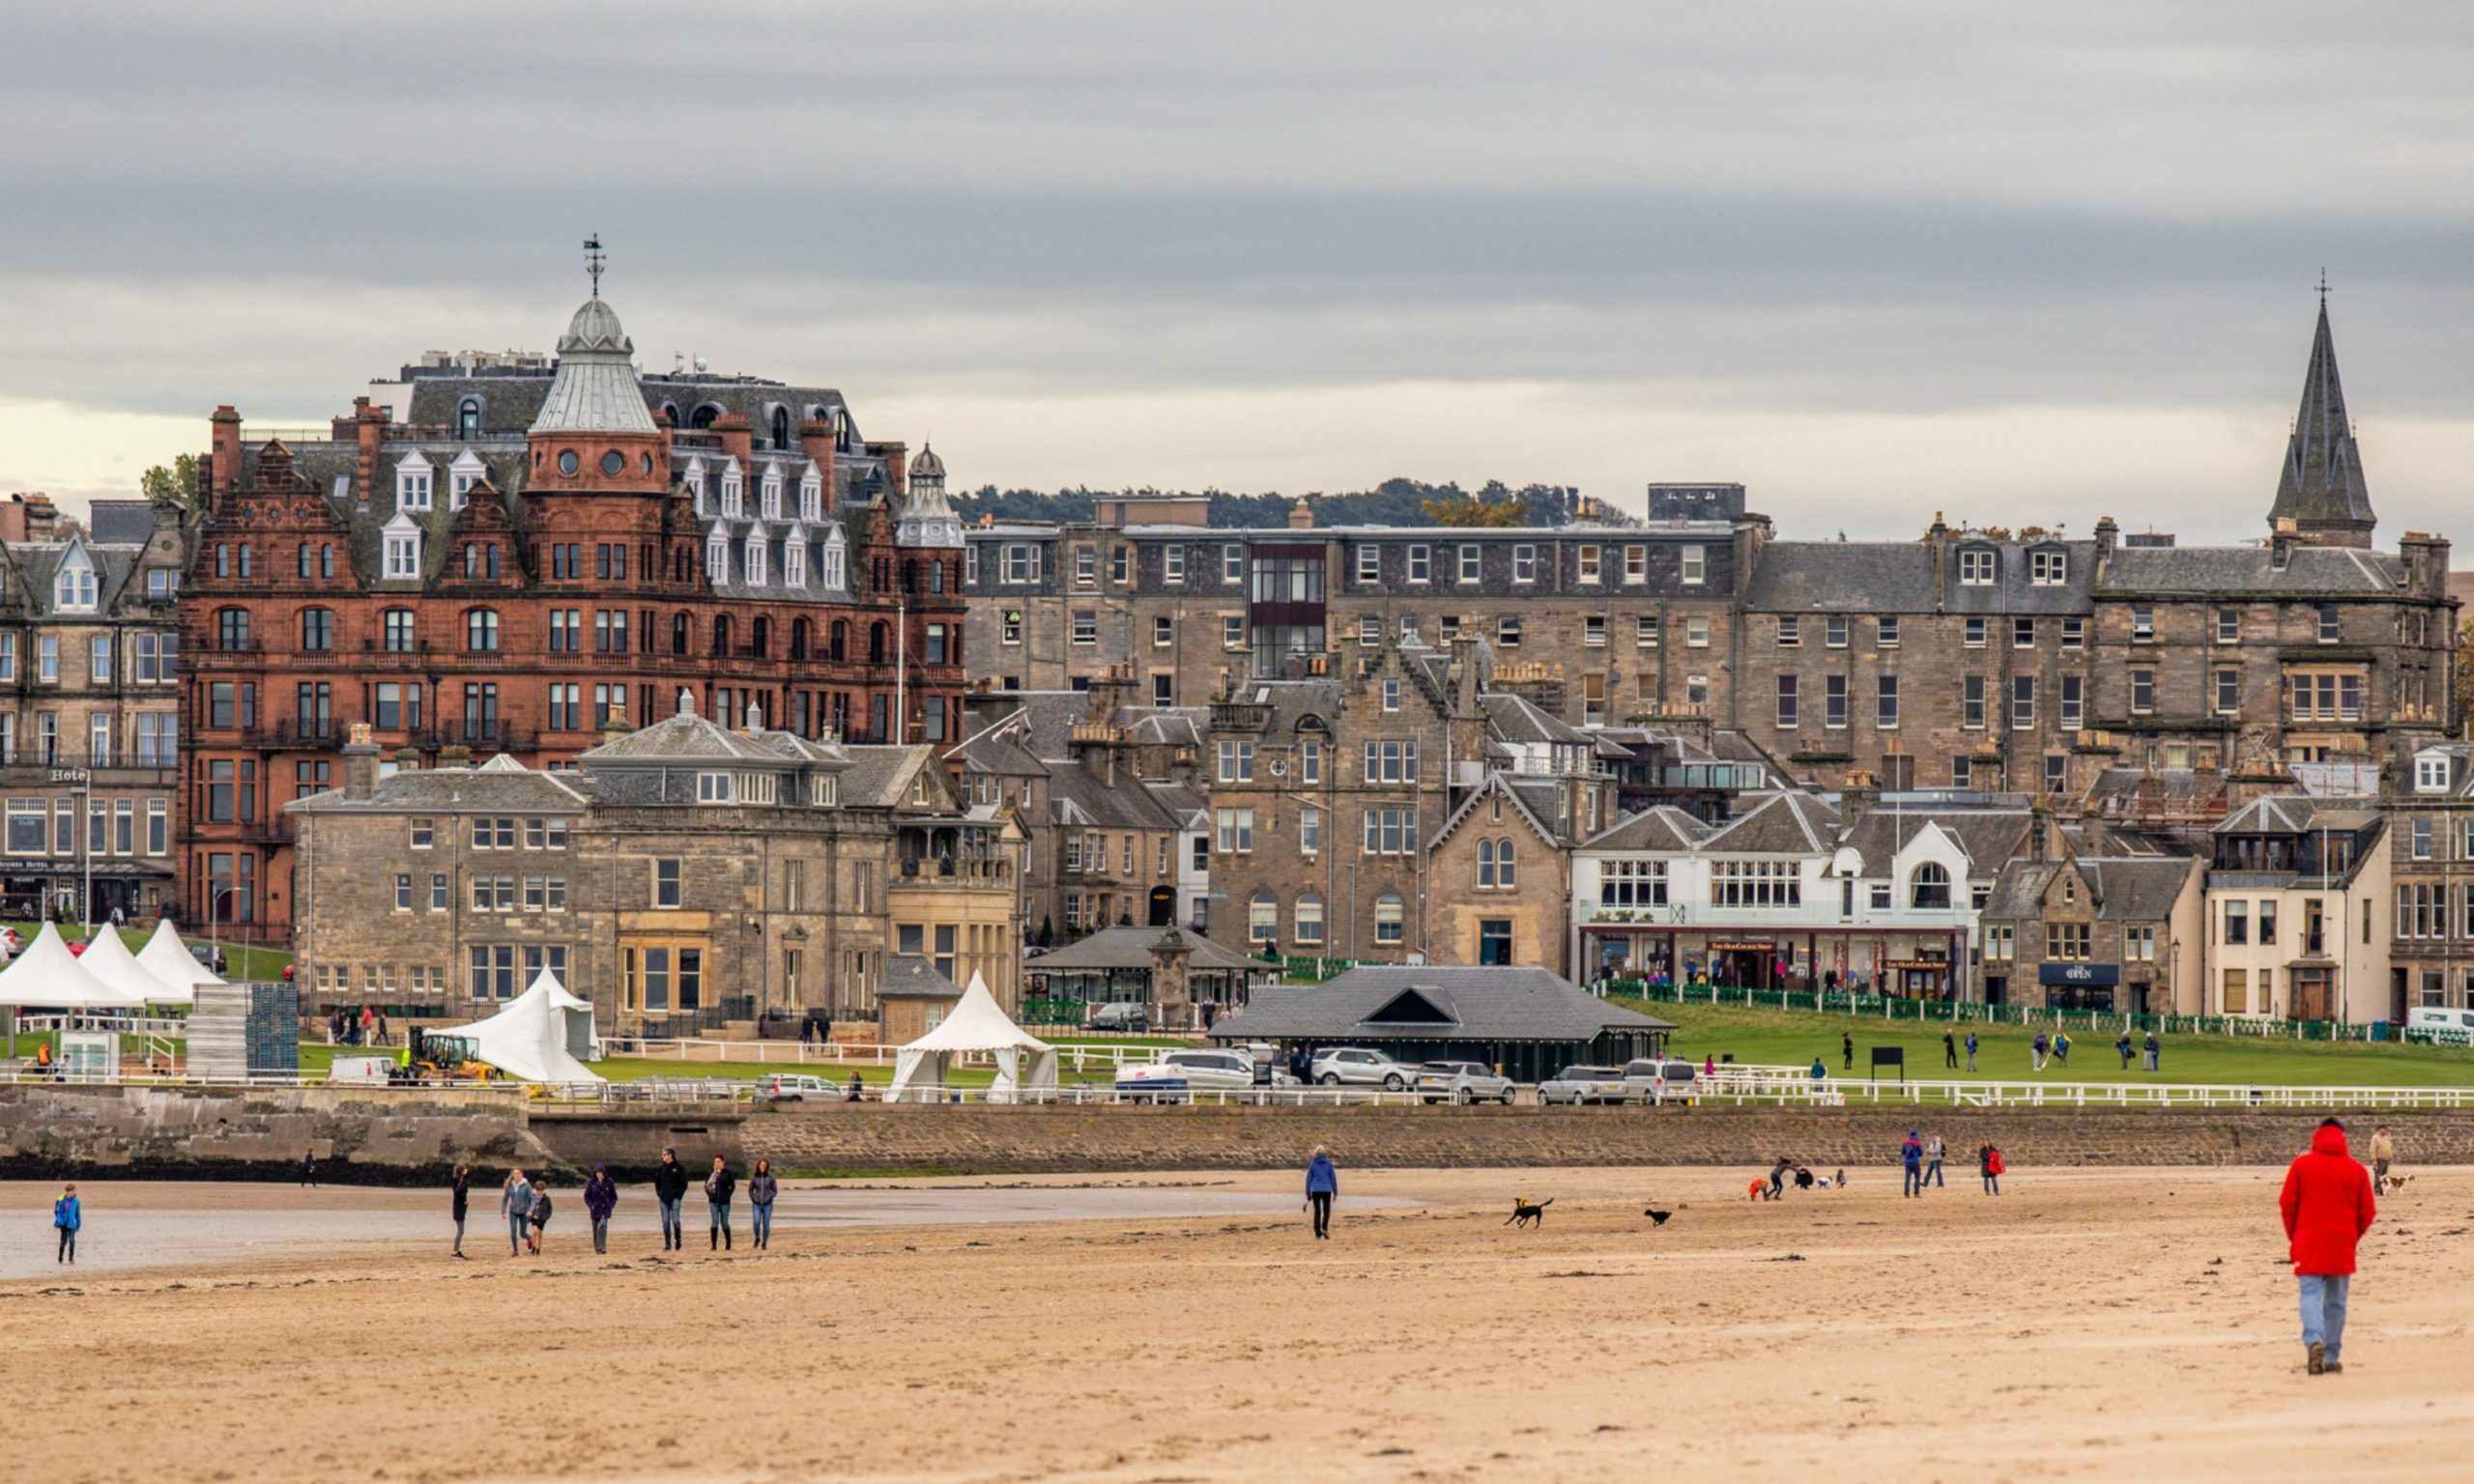 The West Sands features in Full Swing St Andrews shots